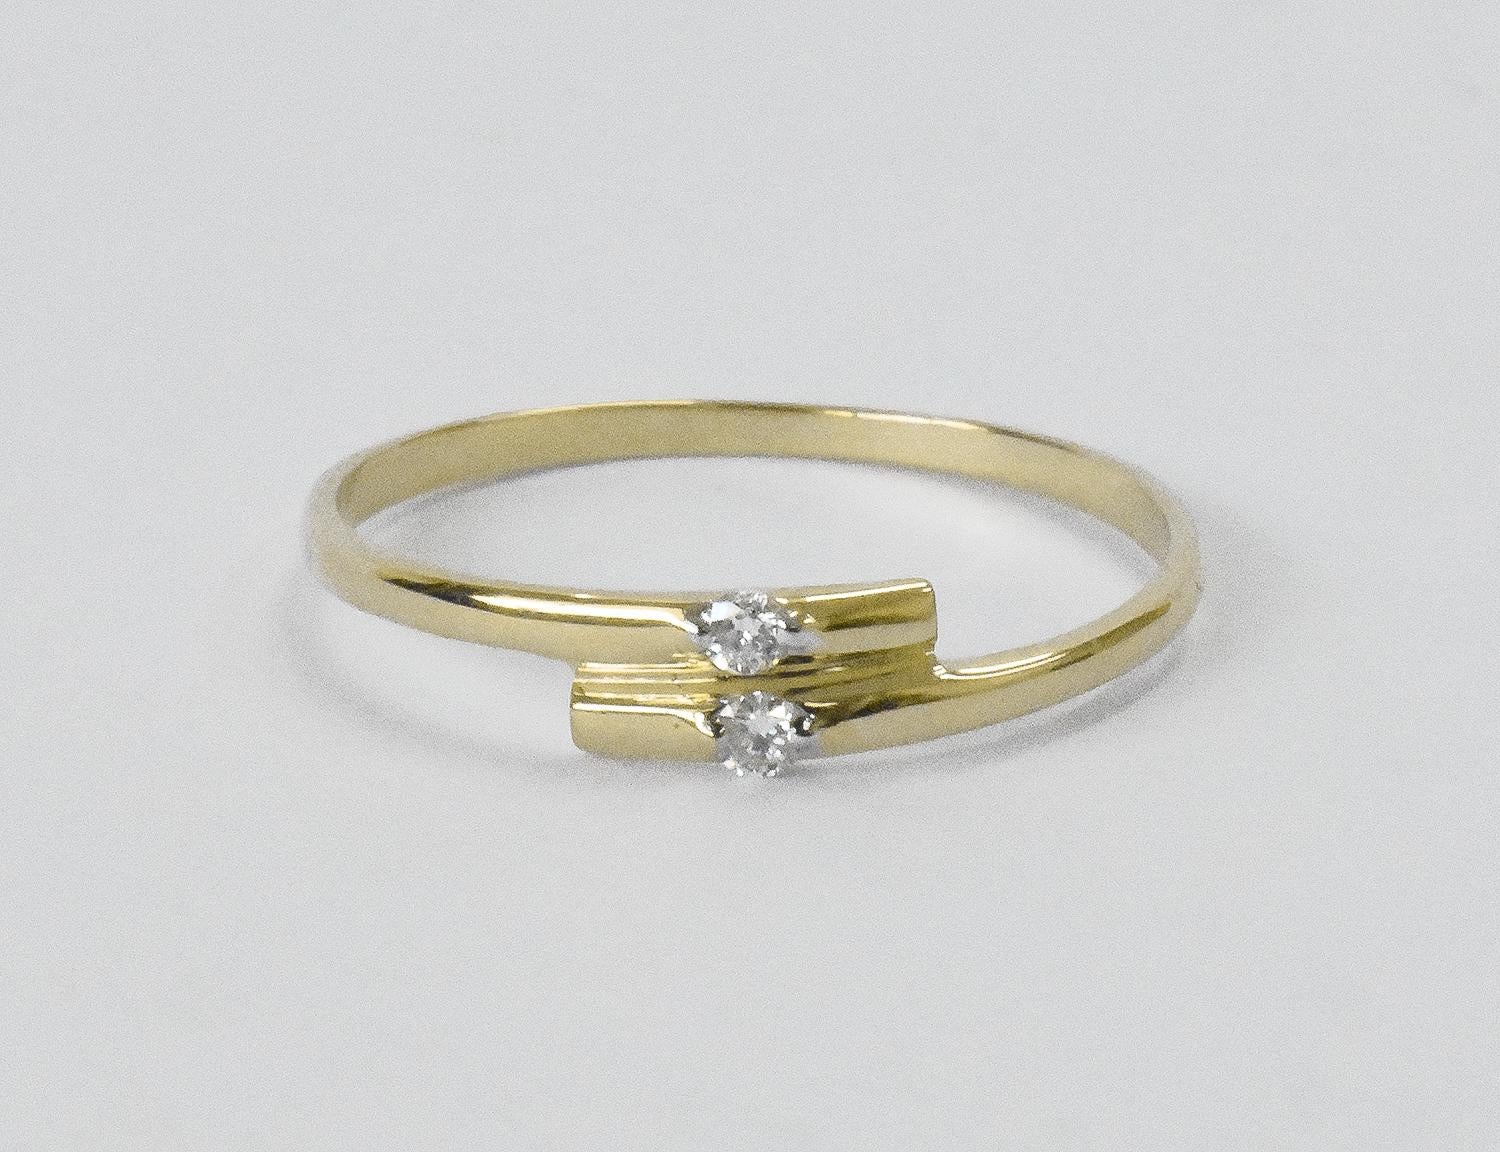 For Sale:  18k Gold Double Diamond Ring Dual Diamond Ring Stacking Ring 5